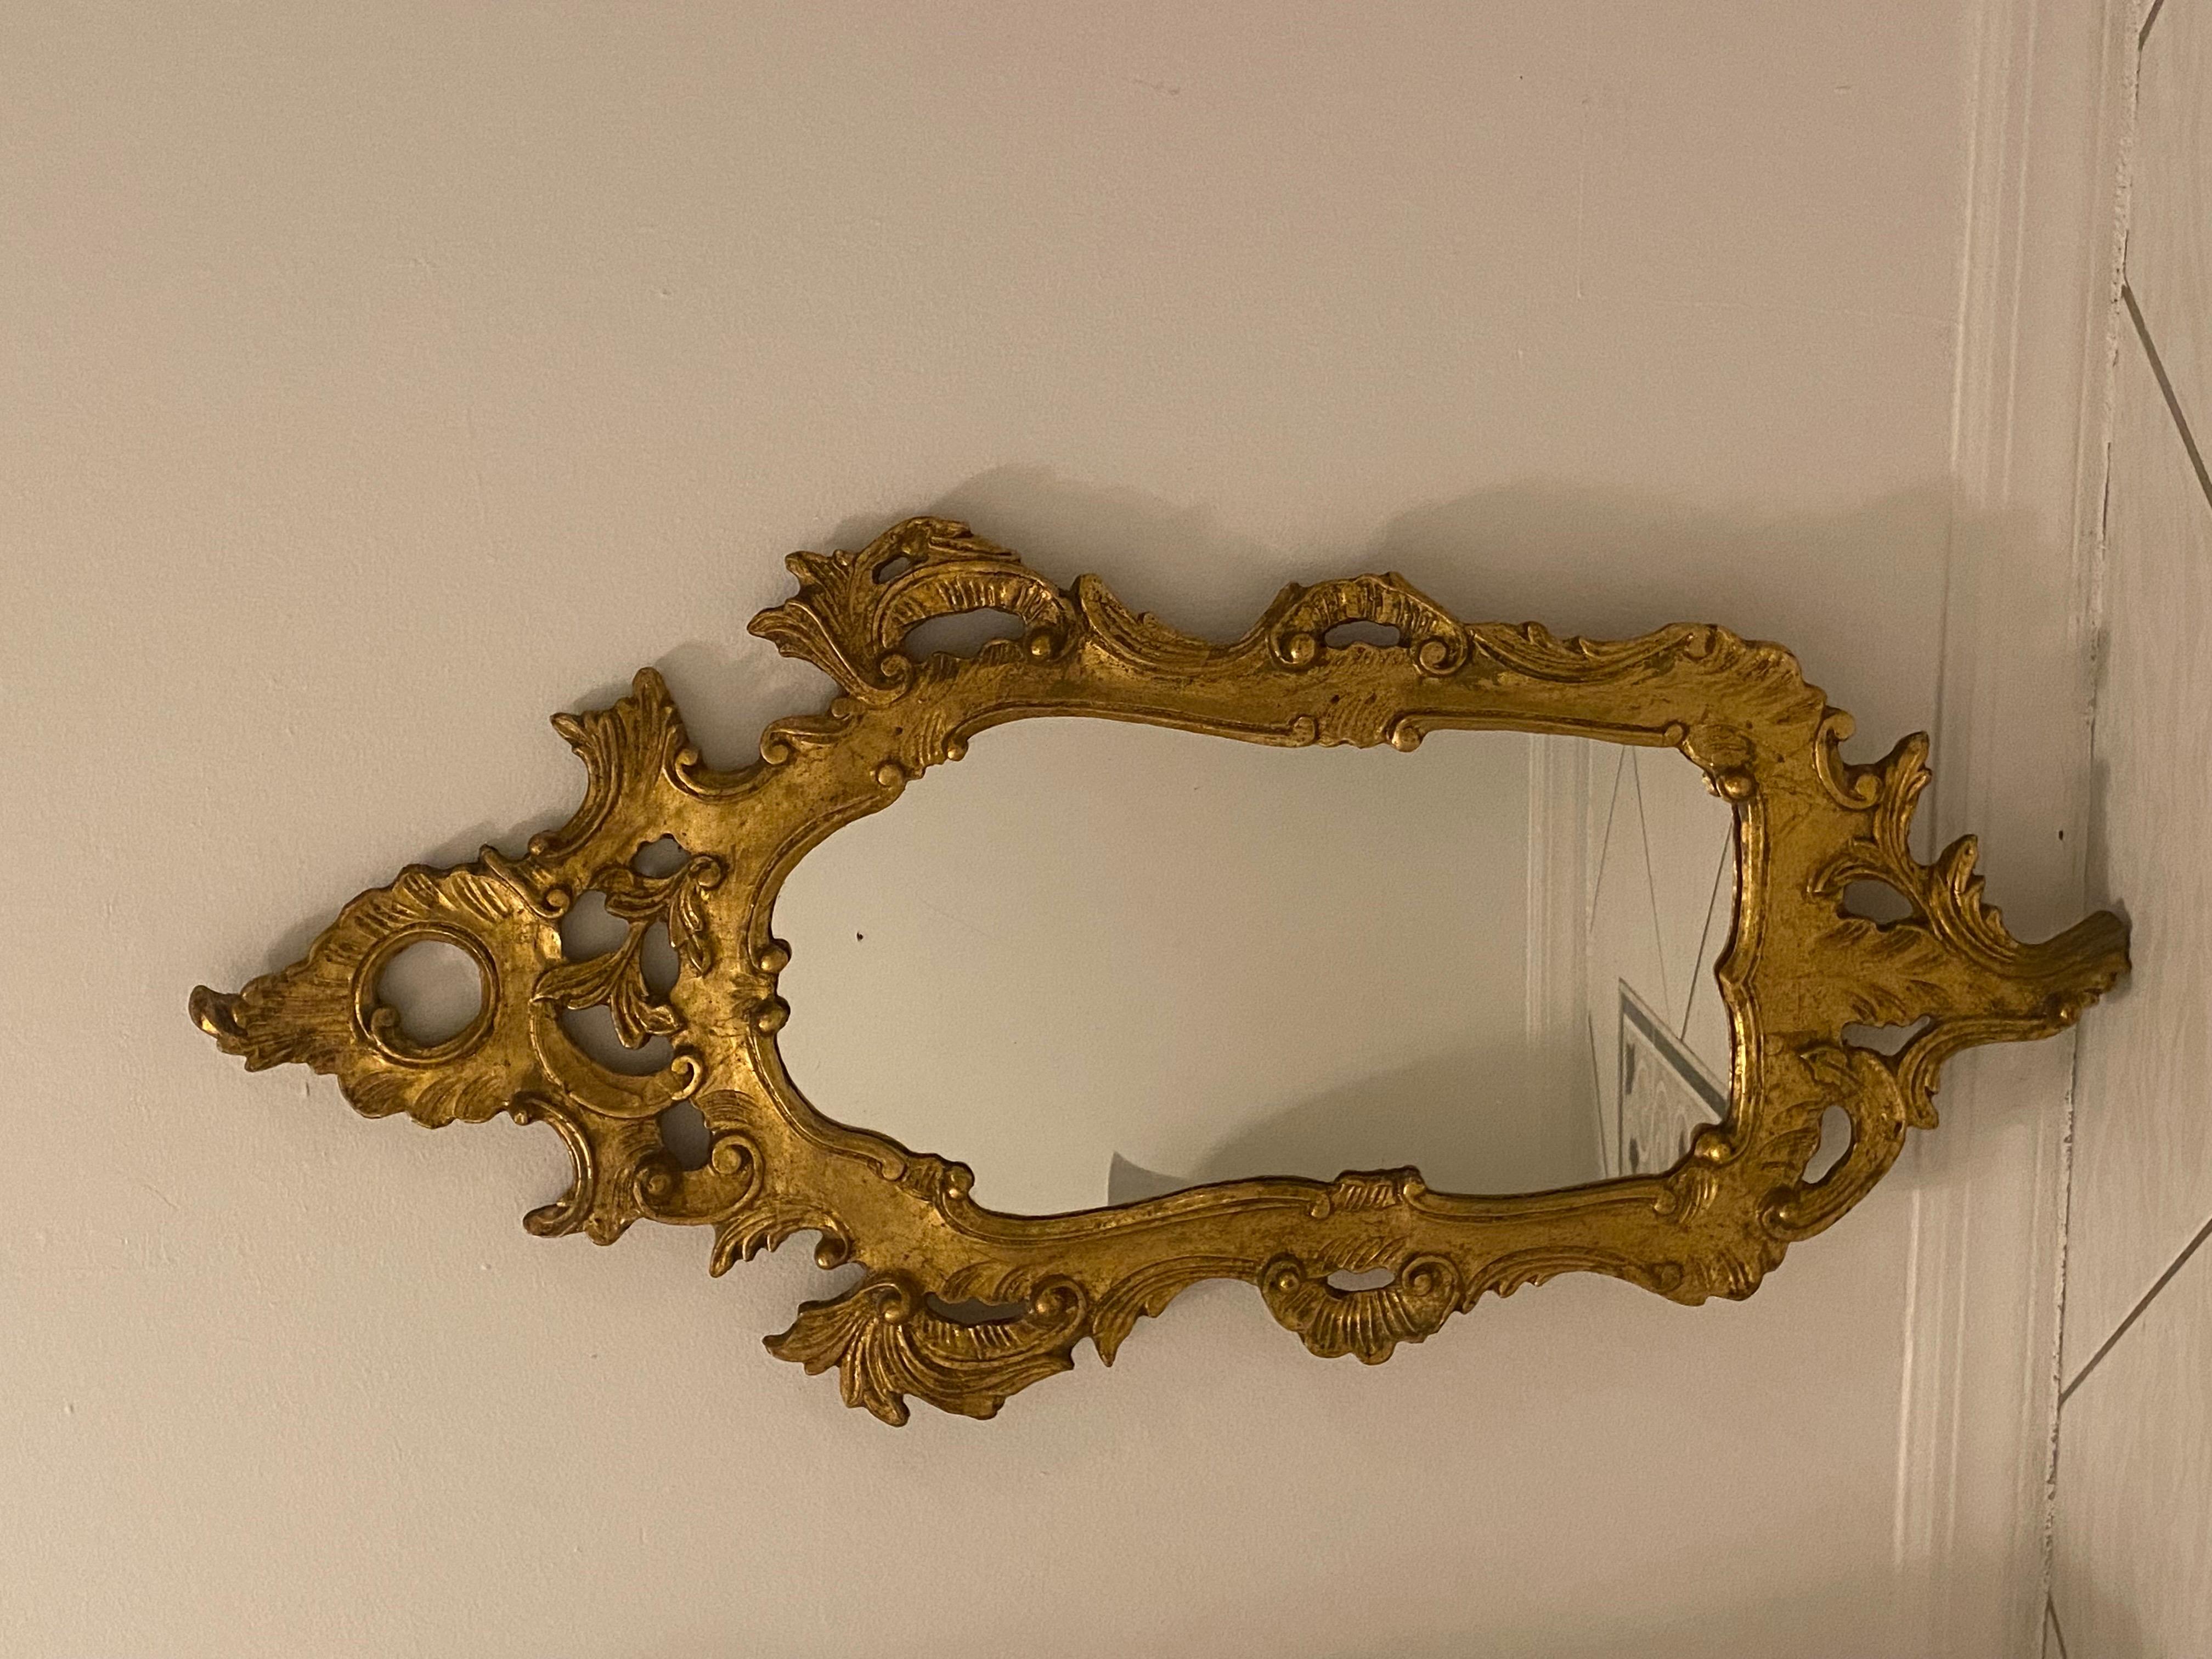 The gorgeous Antique mirror in the style of Rococo is made of carved giltwood with ornate branch-shaped carvings in a C-shape and circular shape motifs and scrolls. 

The piece is in great Vintage condition.

Italy, 1950s.